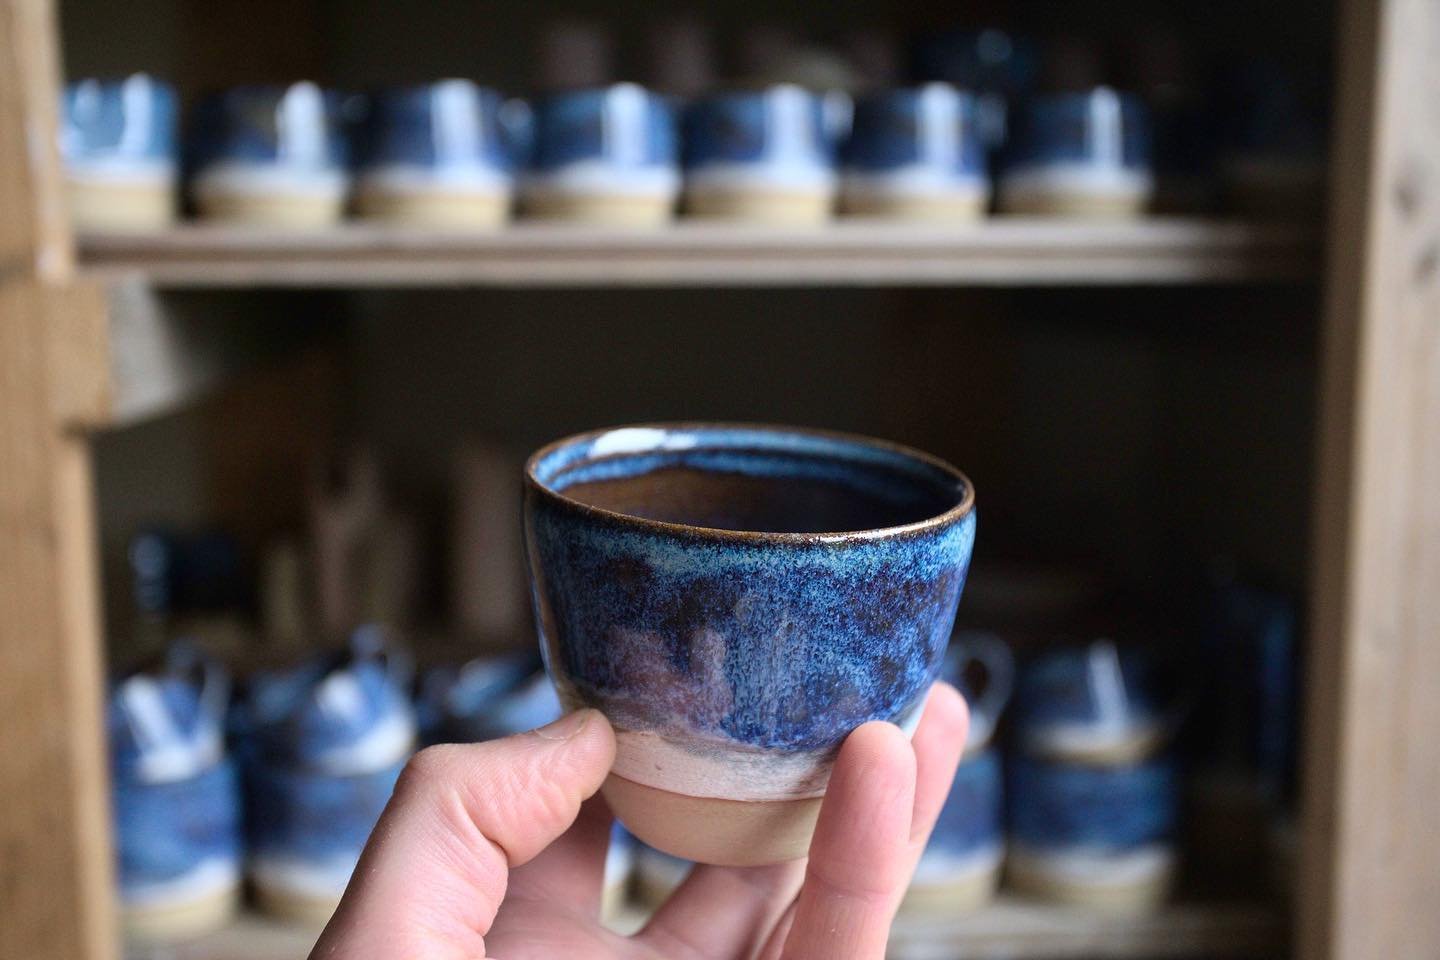 Make your very own Sand &amp; Sea pot! If you&rsquo;ve ever fancied giving pottery a go we now have lessons available for booking. 

Our pottery experiences are an informal introduction to hand building and wheel throwing, and whatever you choose to 